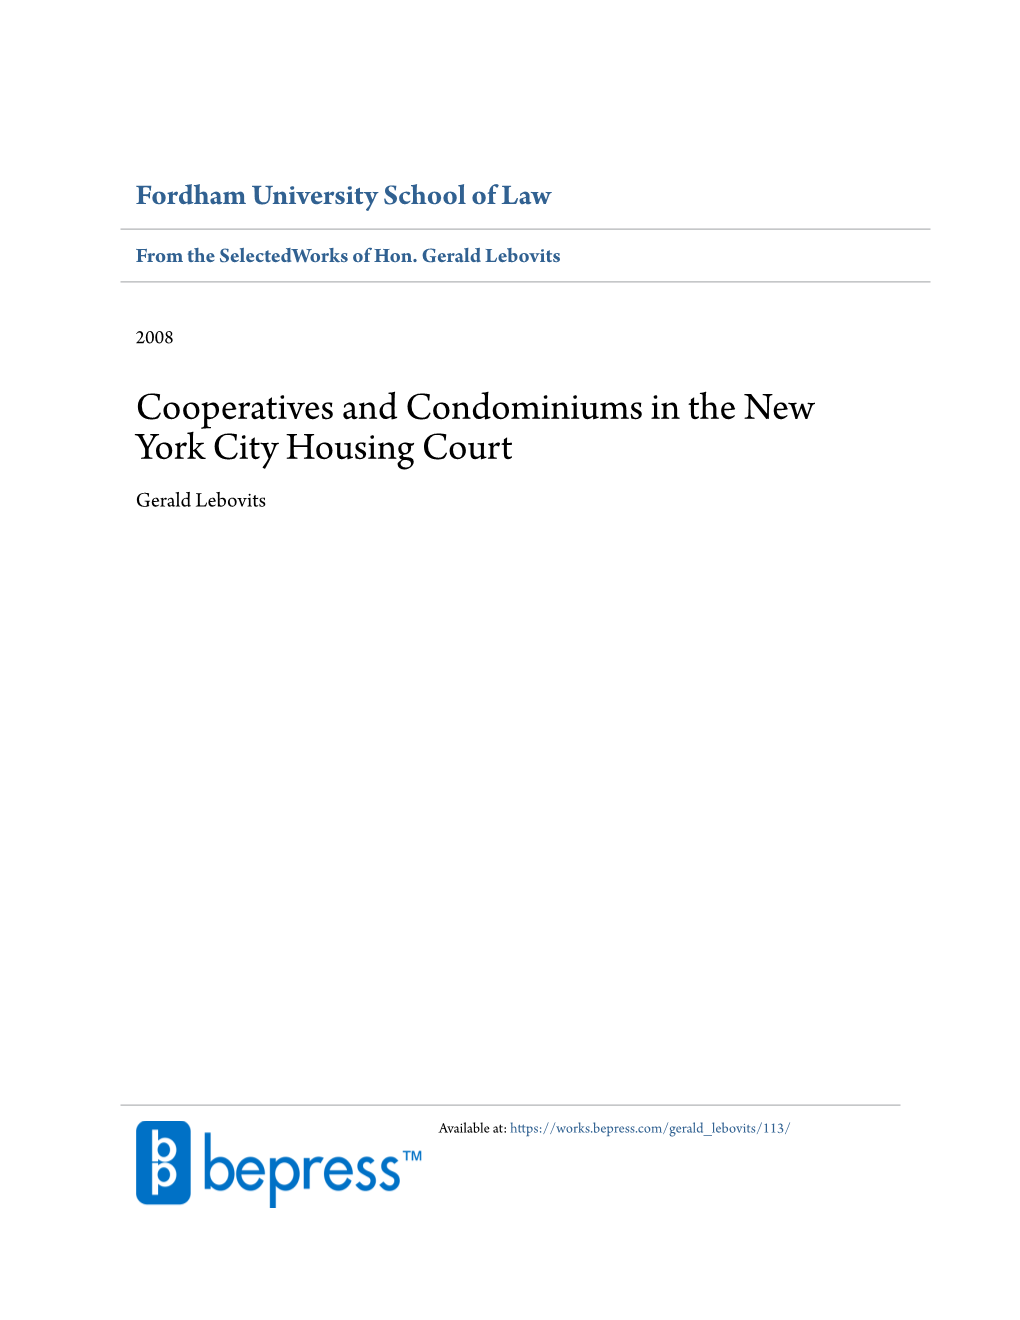 Cooperatives and Condominiums in the New York City Housing Court Gerald Lebovits